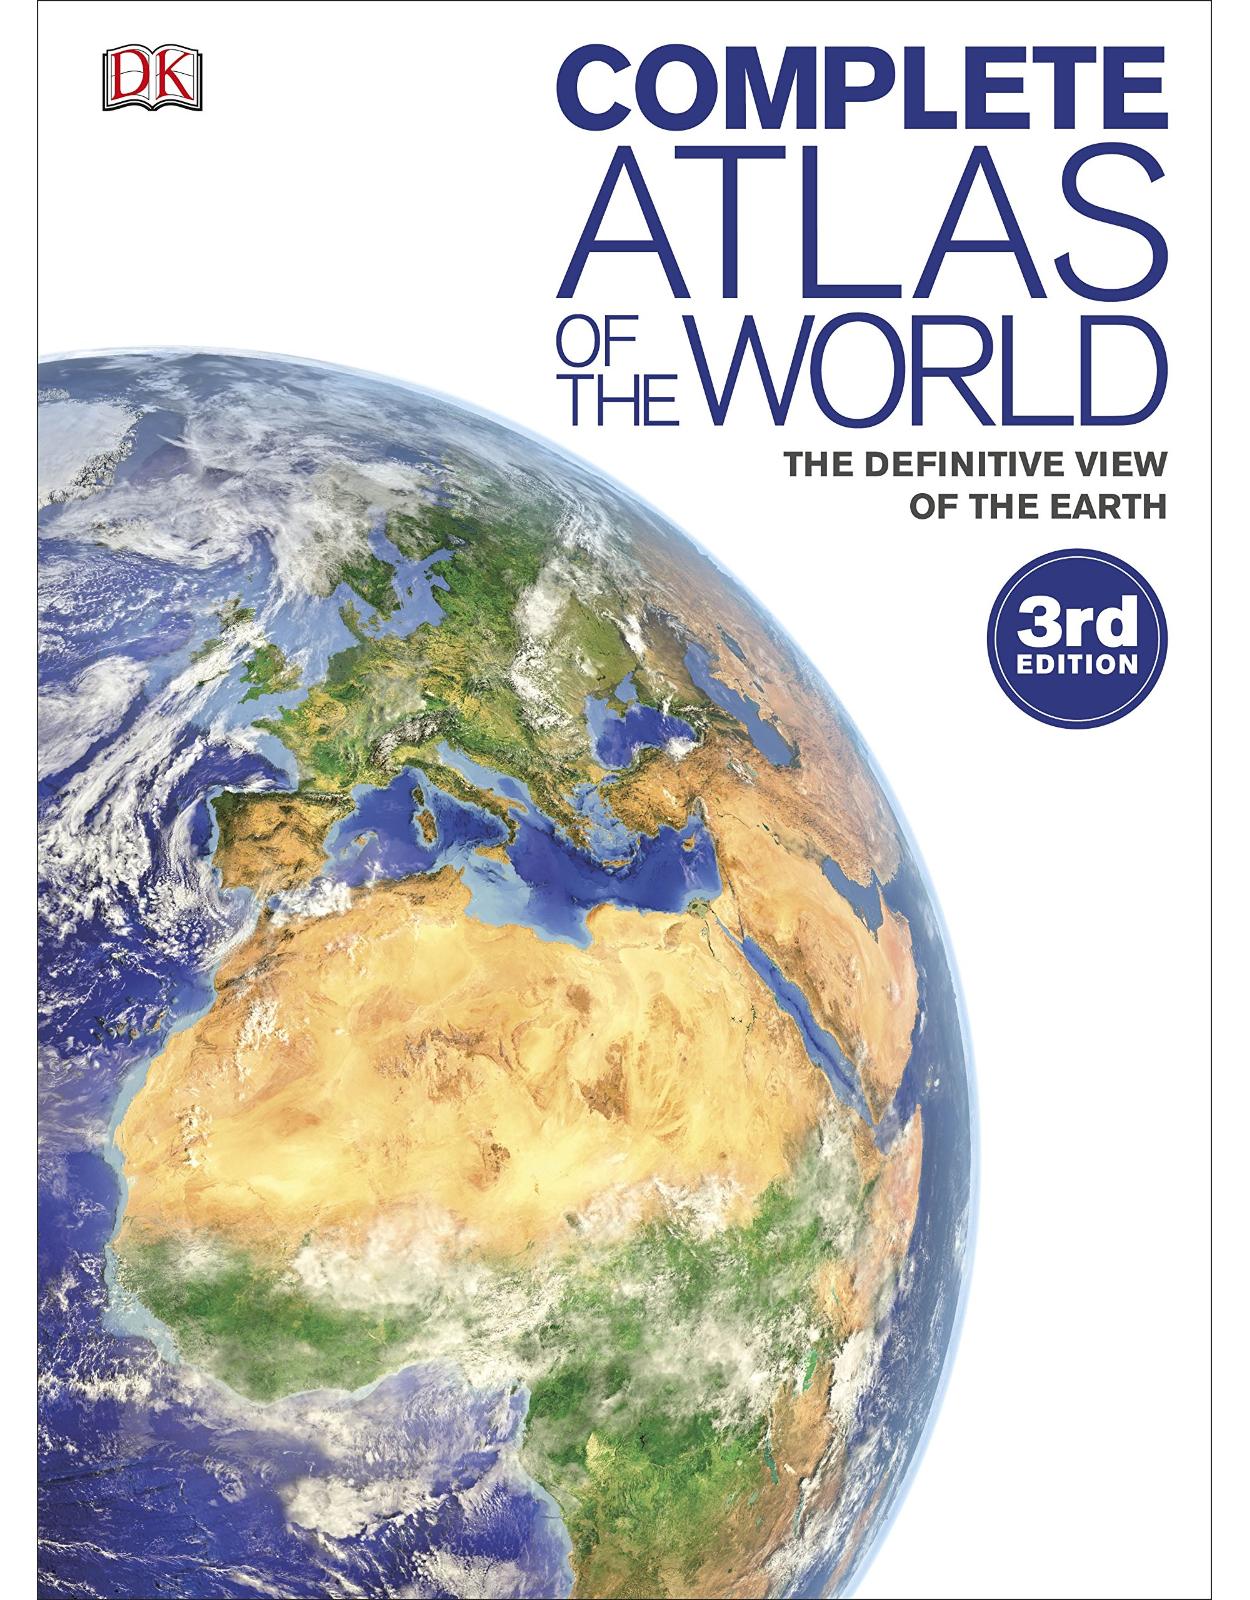 Complete Atlas of the World: The Definitive View of the Earth 